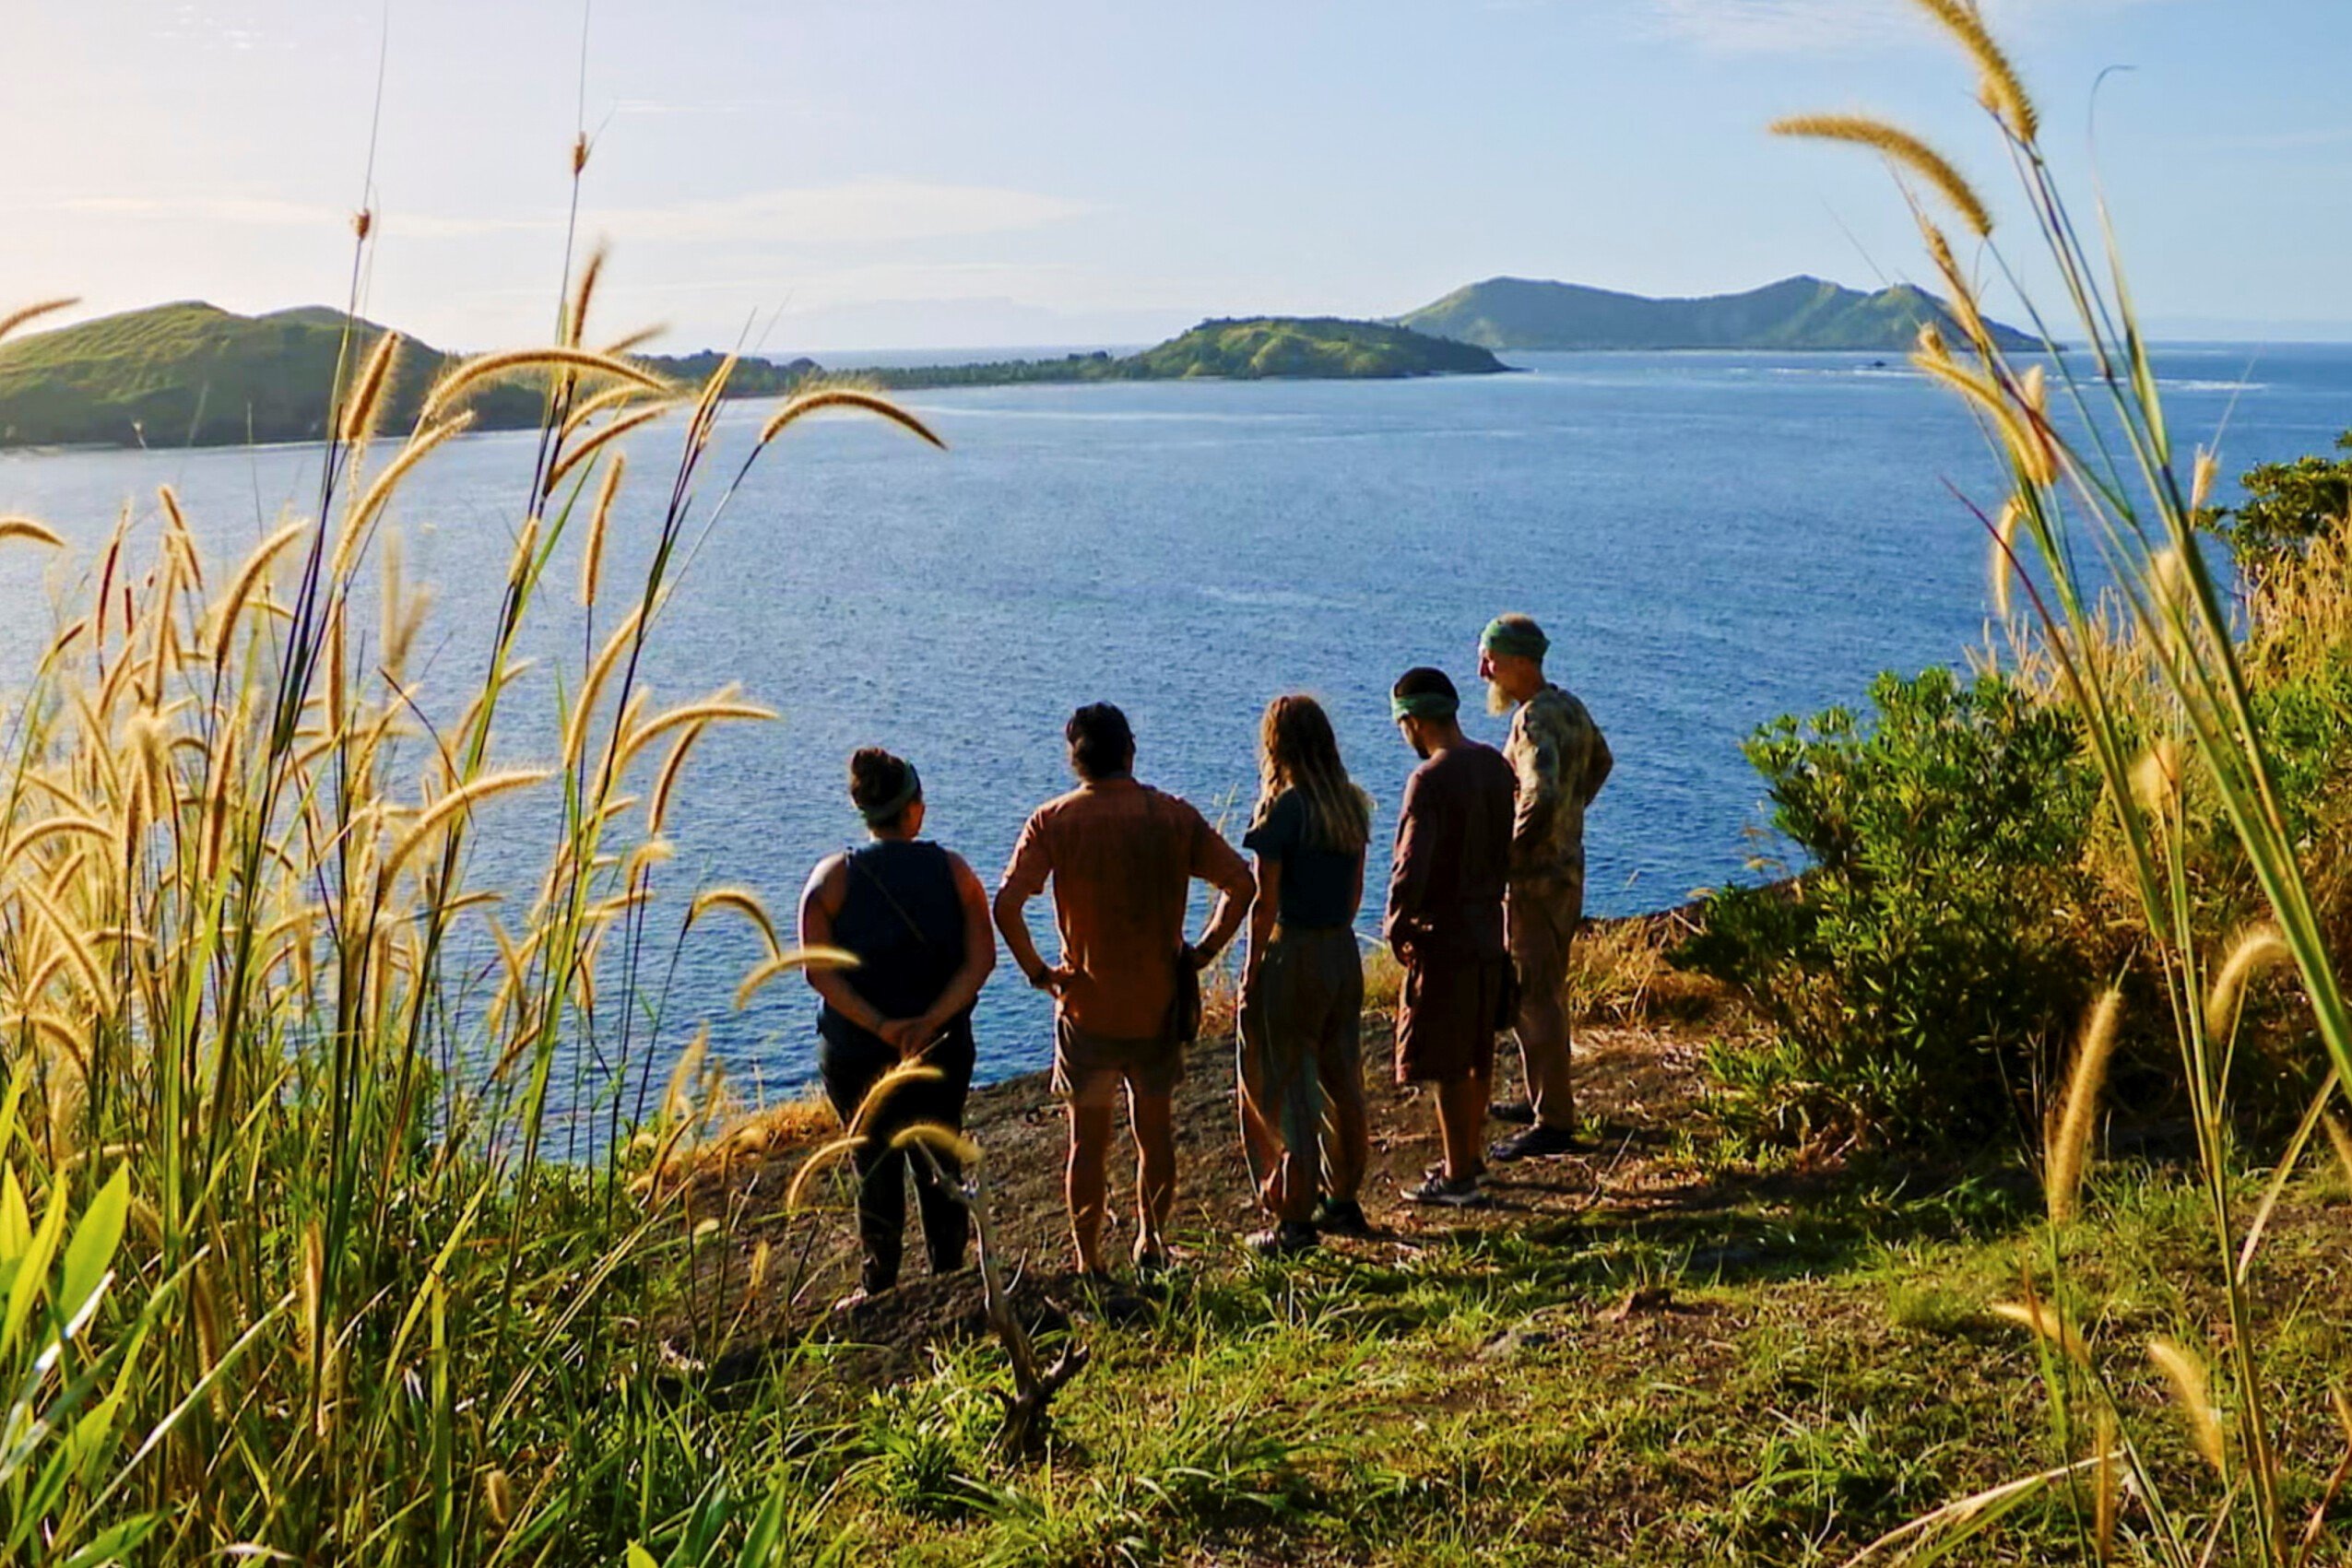 Karla Cruz Godoy, Owen Knight, Cassidy Clark, Jesse Lopez, and Mike Gabler, who star in the 'Survivor' Season 43 finale tonight, Dec. 14, stand on a cliff, looking out at the ocean.